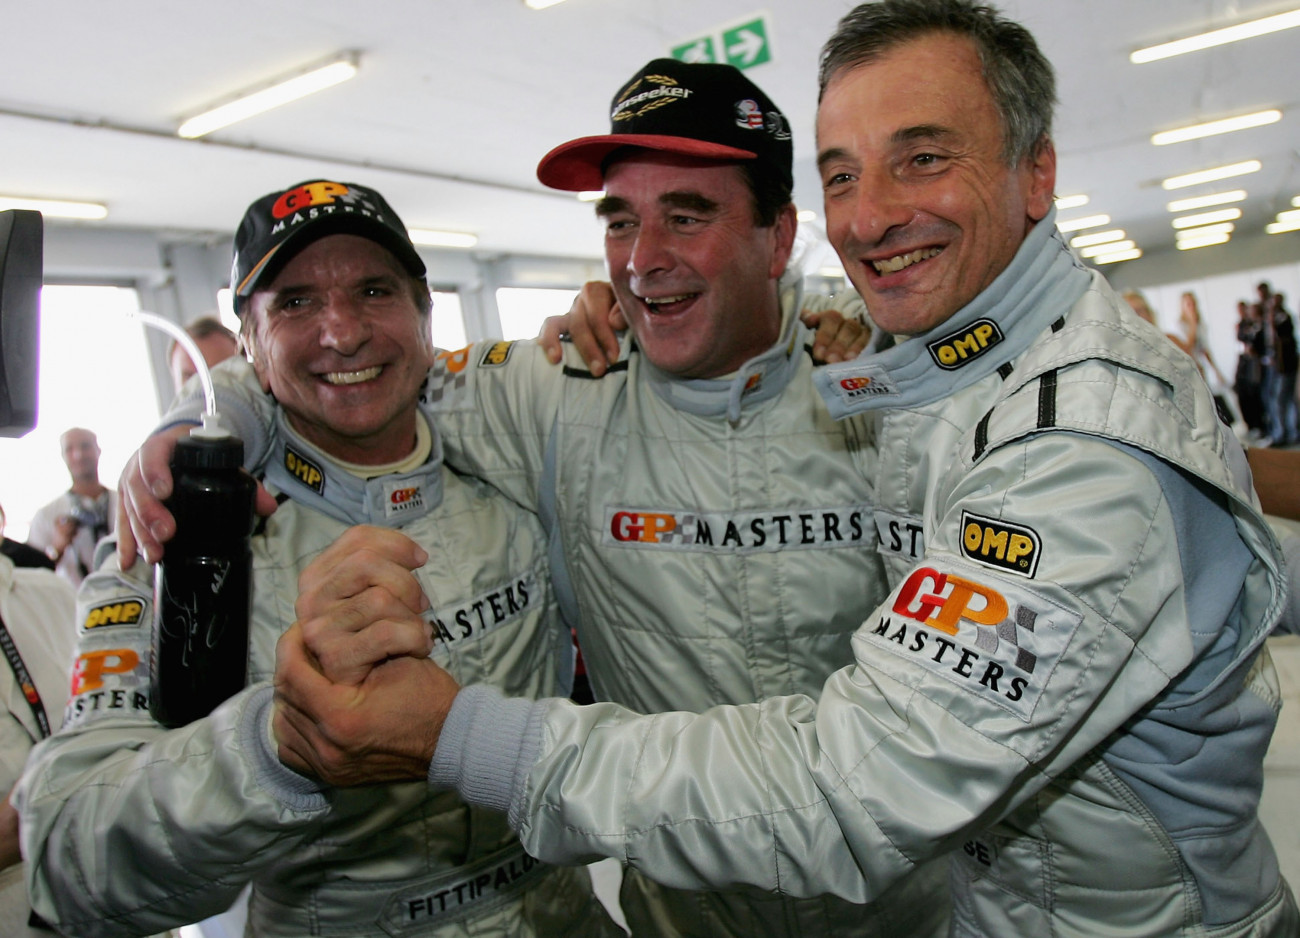 JOHANNESBURG, SOUTH AFRICA - NOVEMBER 12:  Nigel Mansell of Great Britain celebrates his pole position with Emerson Fittipaldi (2nd Place) and Ricardo Patrese (3rd) after Qualifying for the Grand Prix Masters race at the Kyalami Circuit on November 12, 2005 in Johannesburg, South Africa.  (Photo by Clive Rose/Getty Images)